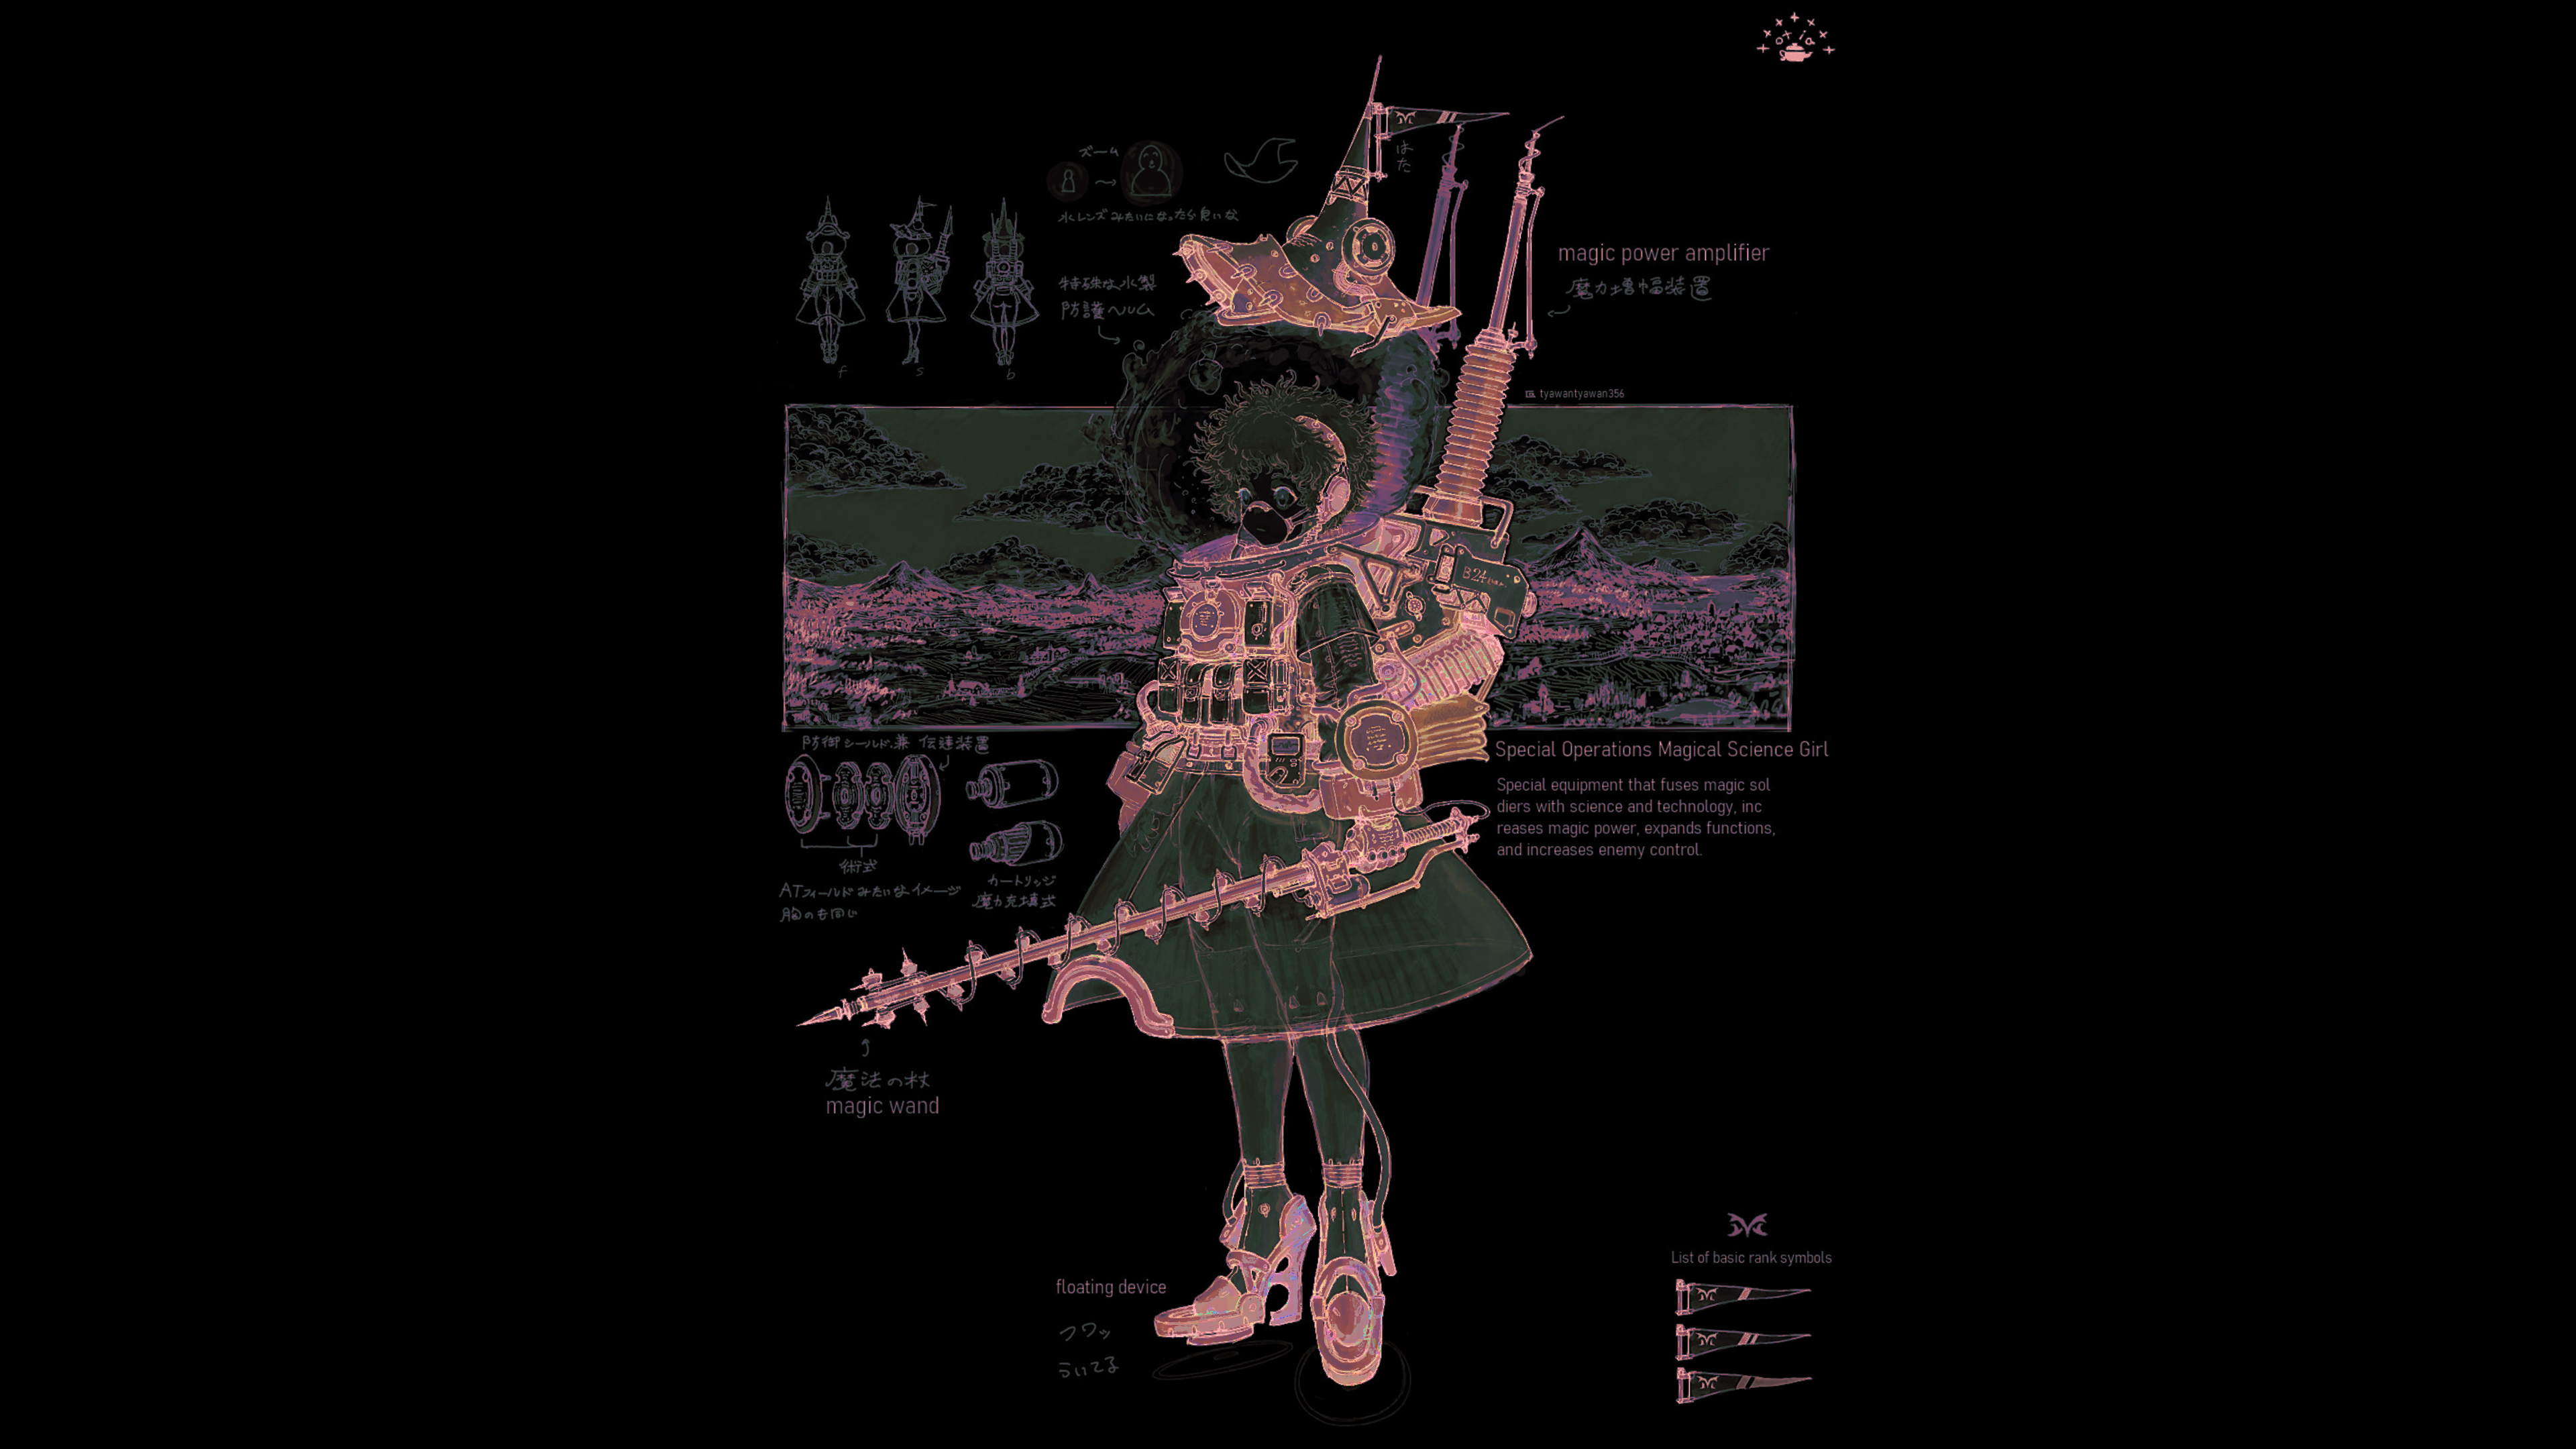 Magical Girls Science Military Industrial Curly Hair Weapon Heavy Equipment Army Map Schematic Infog 3840x2160